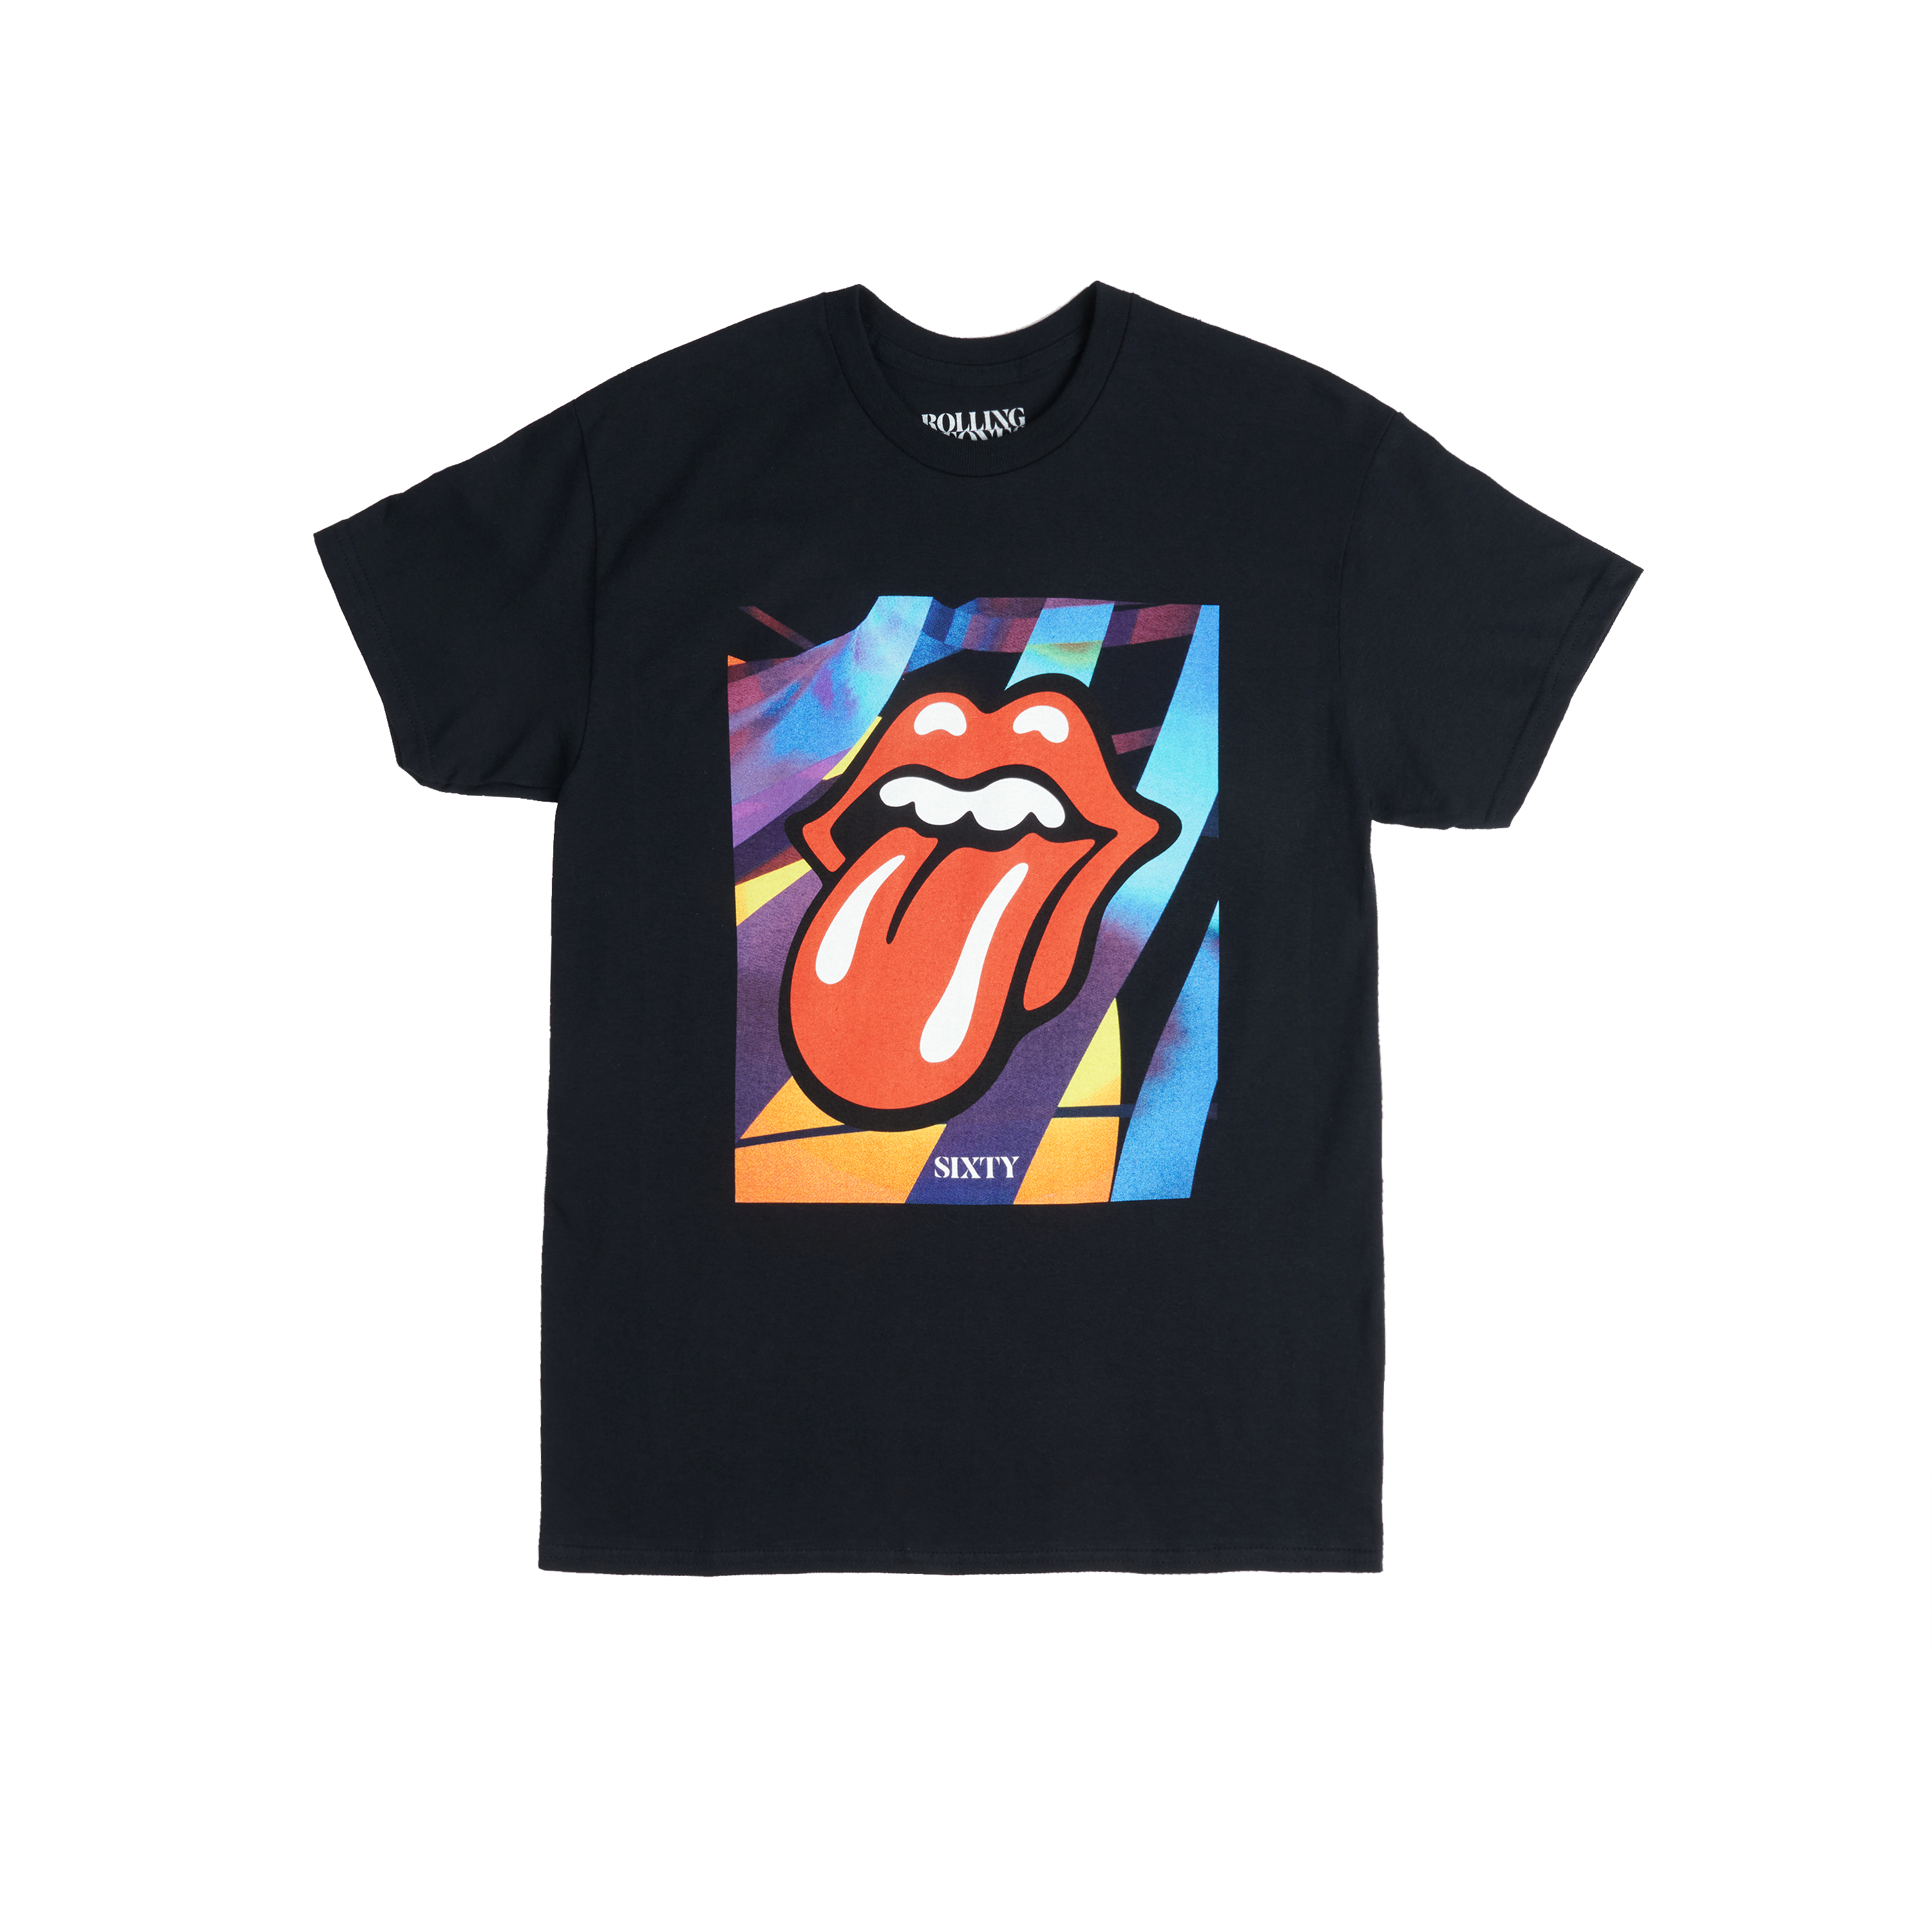 The Rolling Stones - Sixty Box Graphic Europe Tour T-Shirt